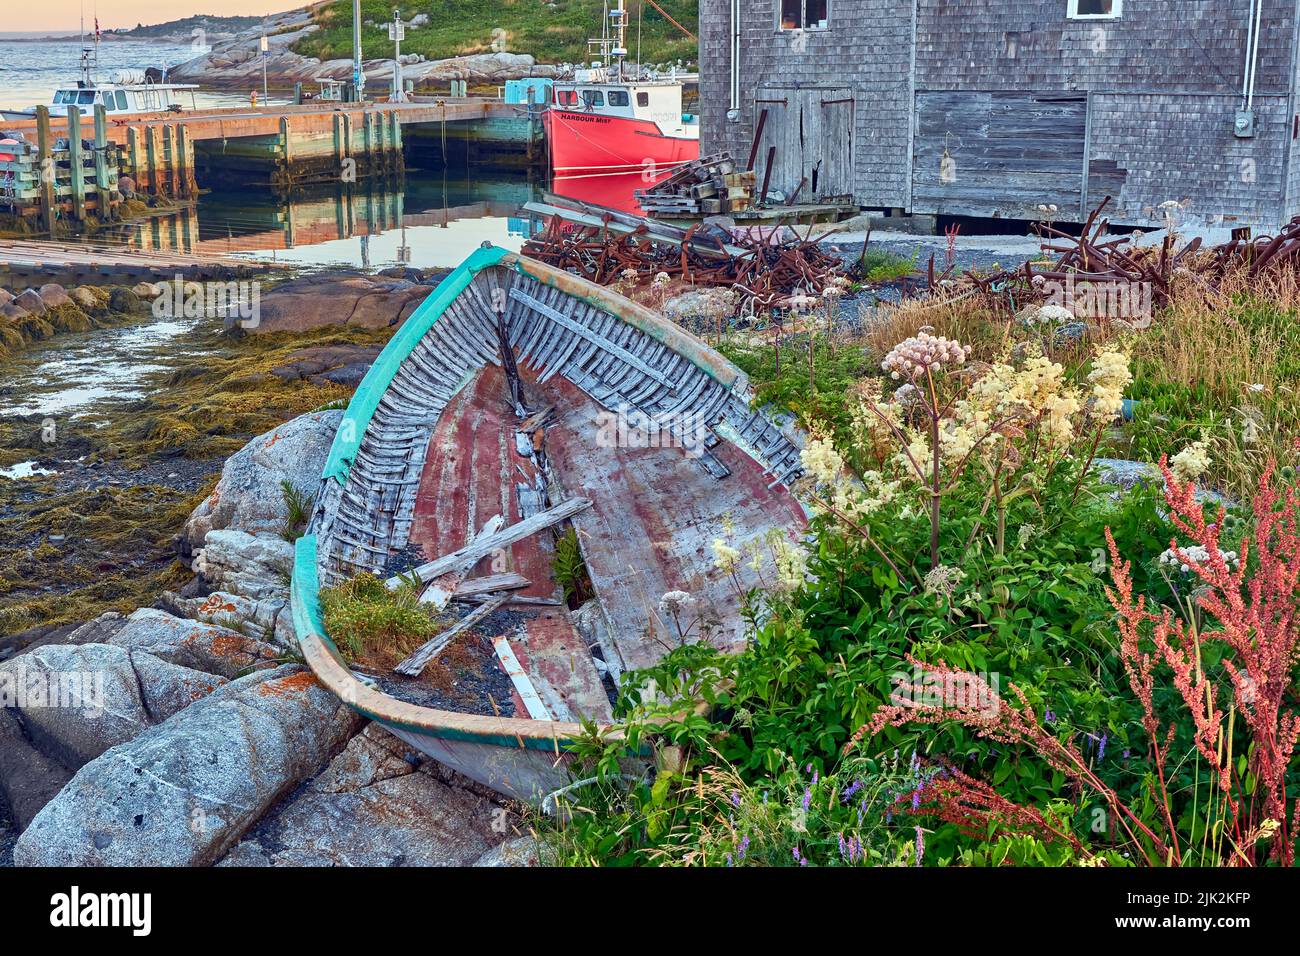 Derelict dorey discarded on the rocks at the edge of the harbour in Pegg's Cove Nova Scotia. Stock Photo